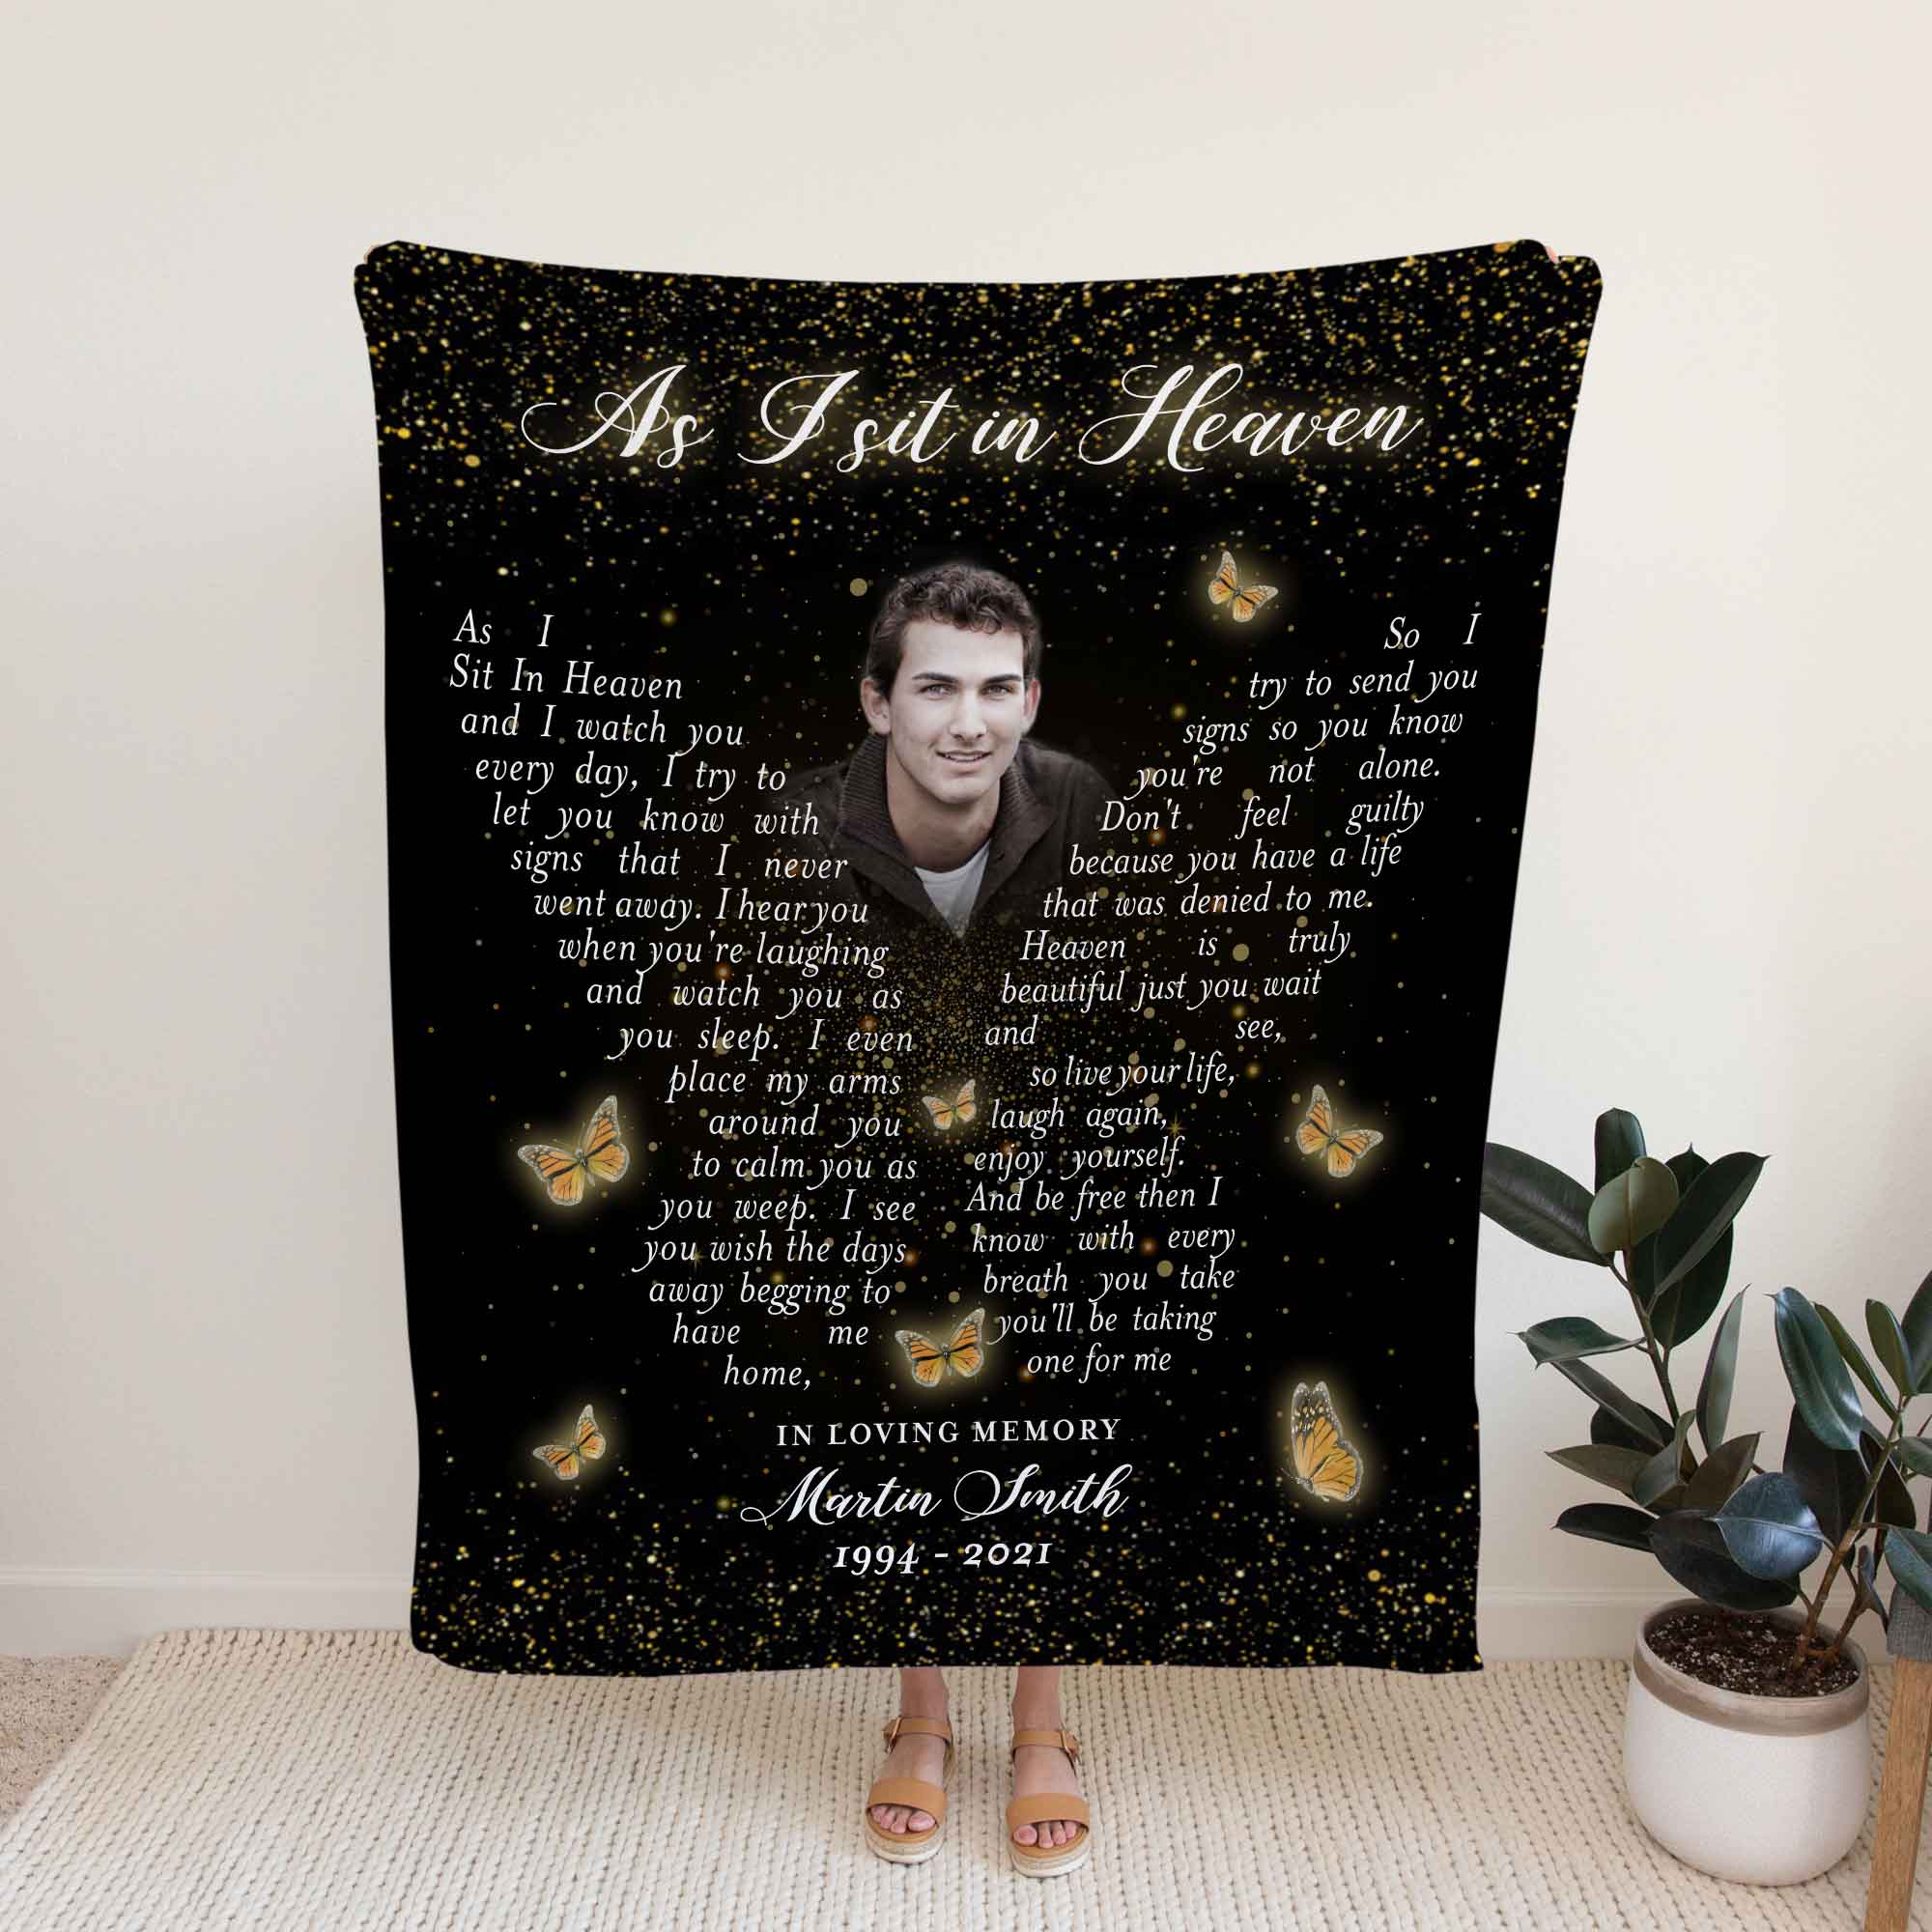 As I Sit In Heaven Remembrance Blanket For Loss Of Son, Fathers Day Gift, Sympathy Blanket For Funeral